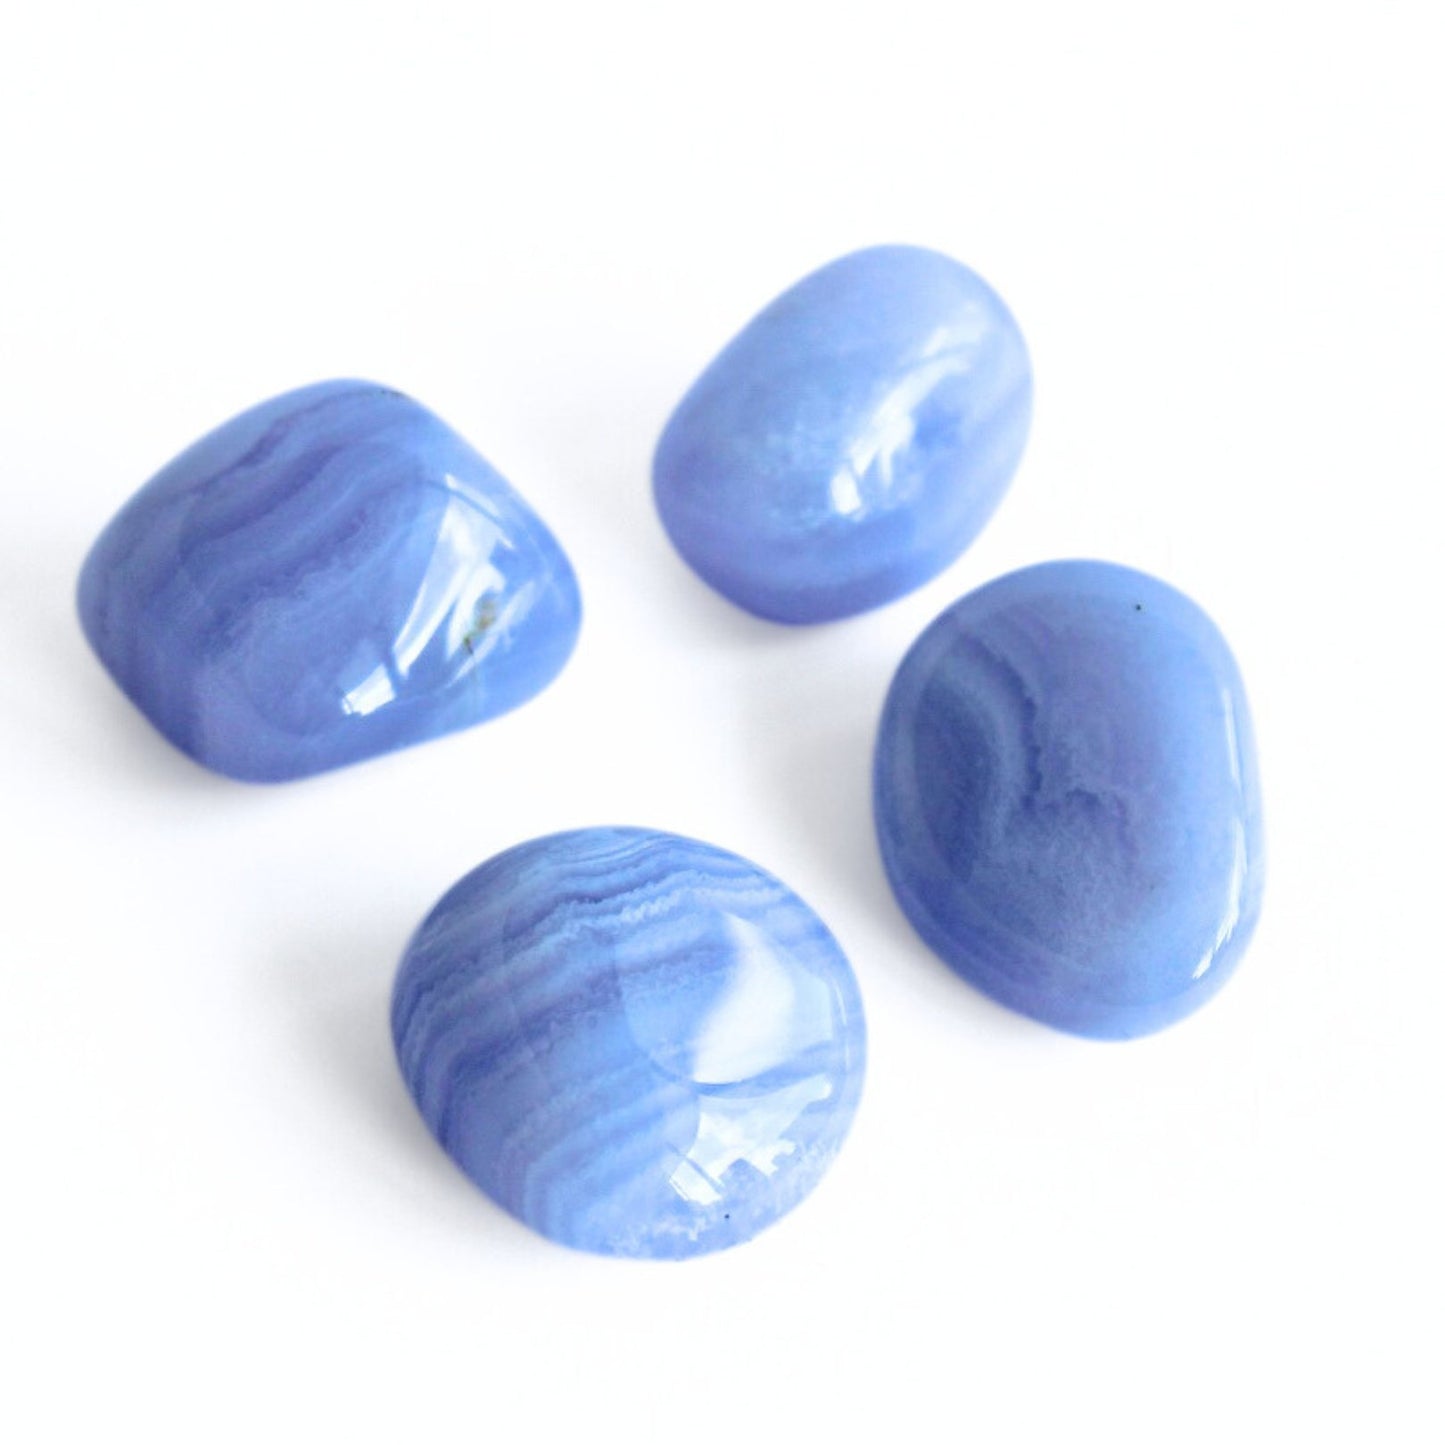 Blue Lace Agate Tumble - Conscious Crystals New Zealand Crystal and Spiritual Shop